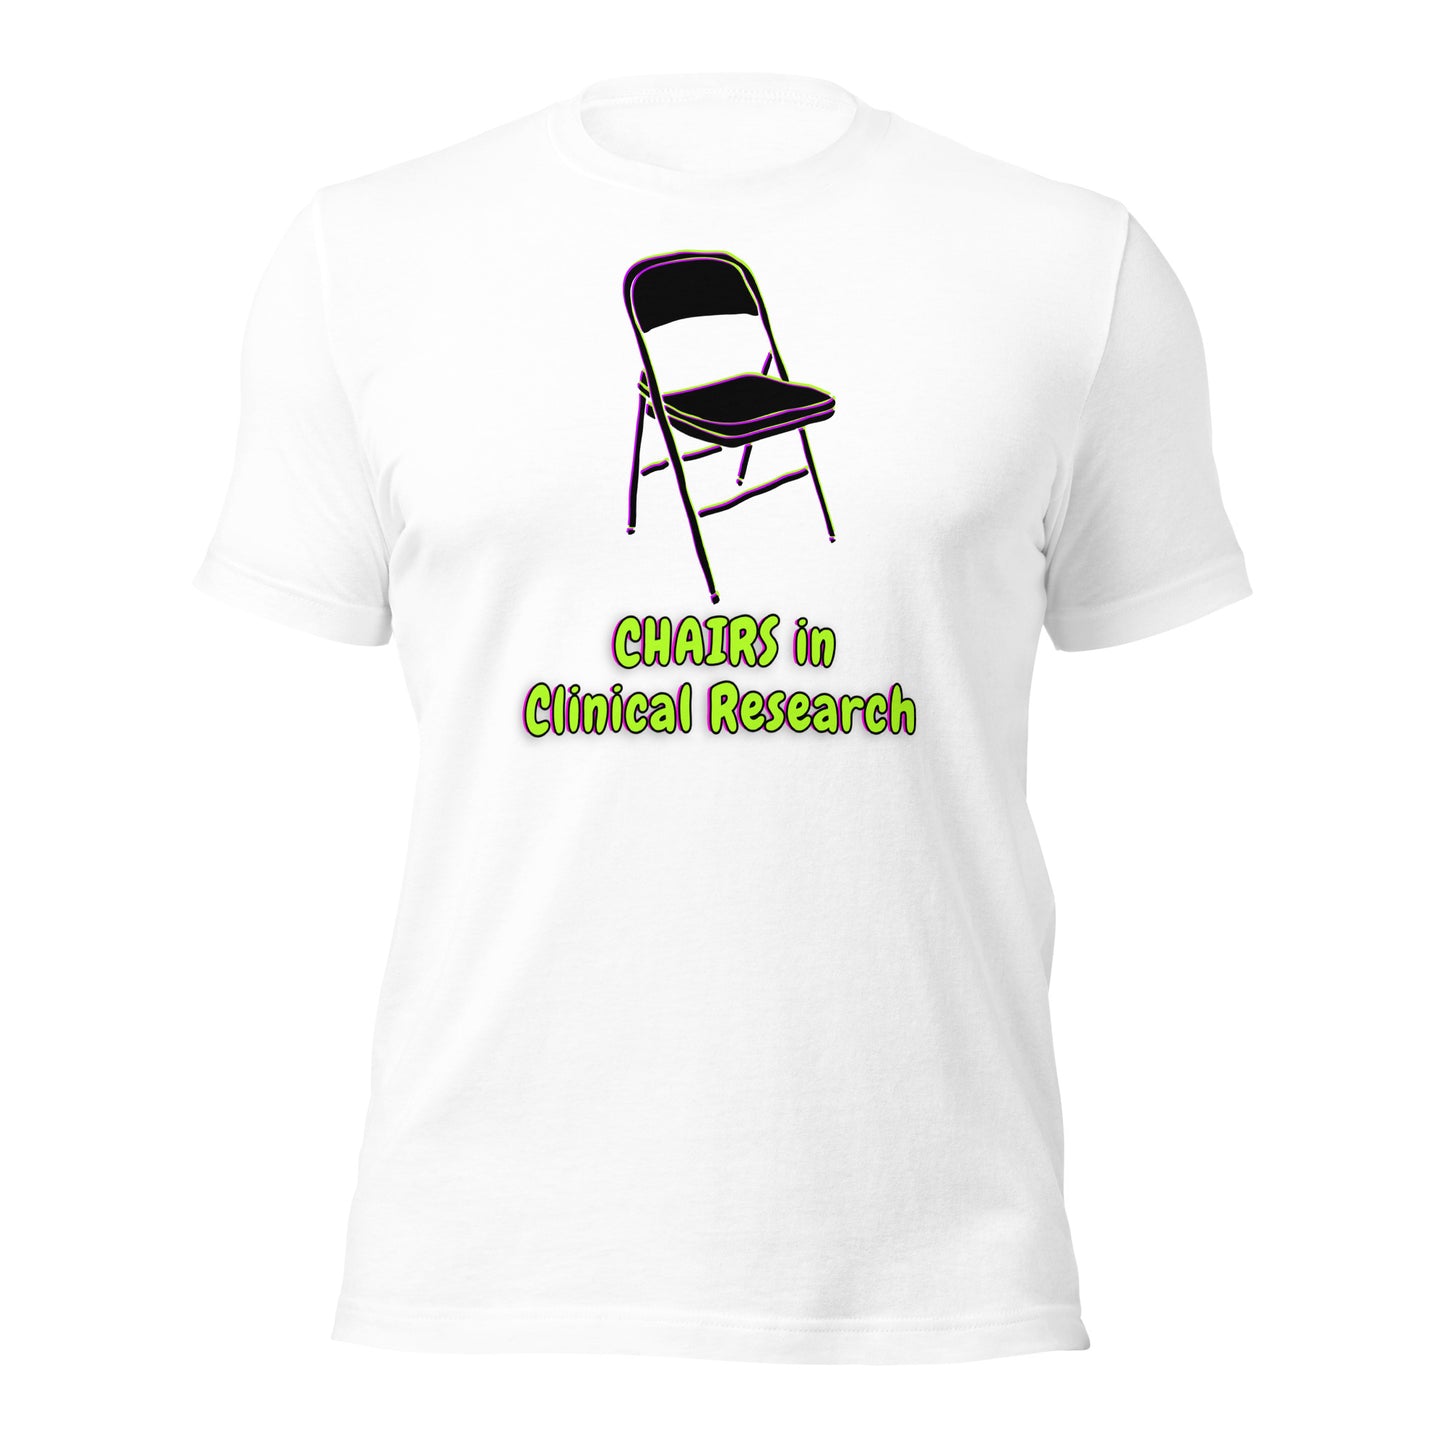 CHAIRS in Clinical Research Unisex t-shirt